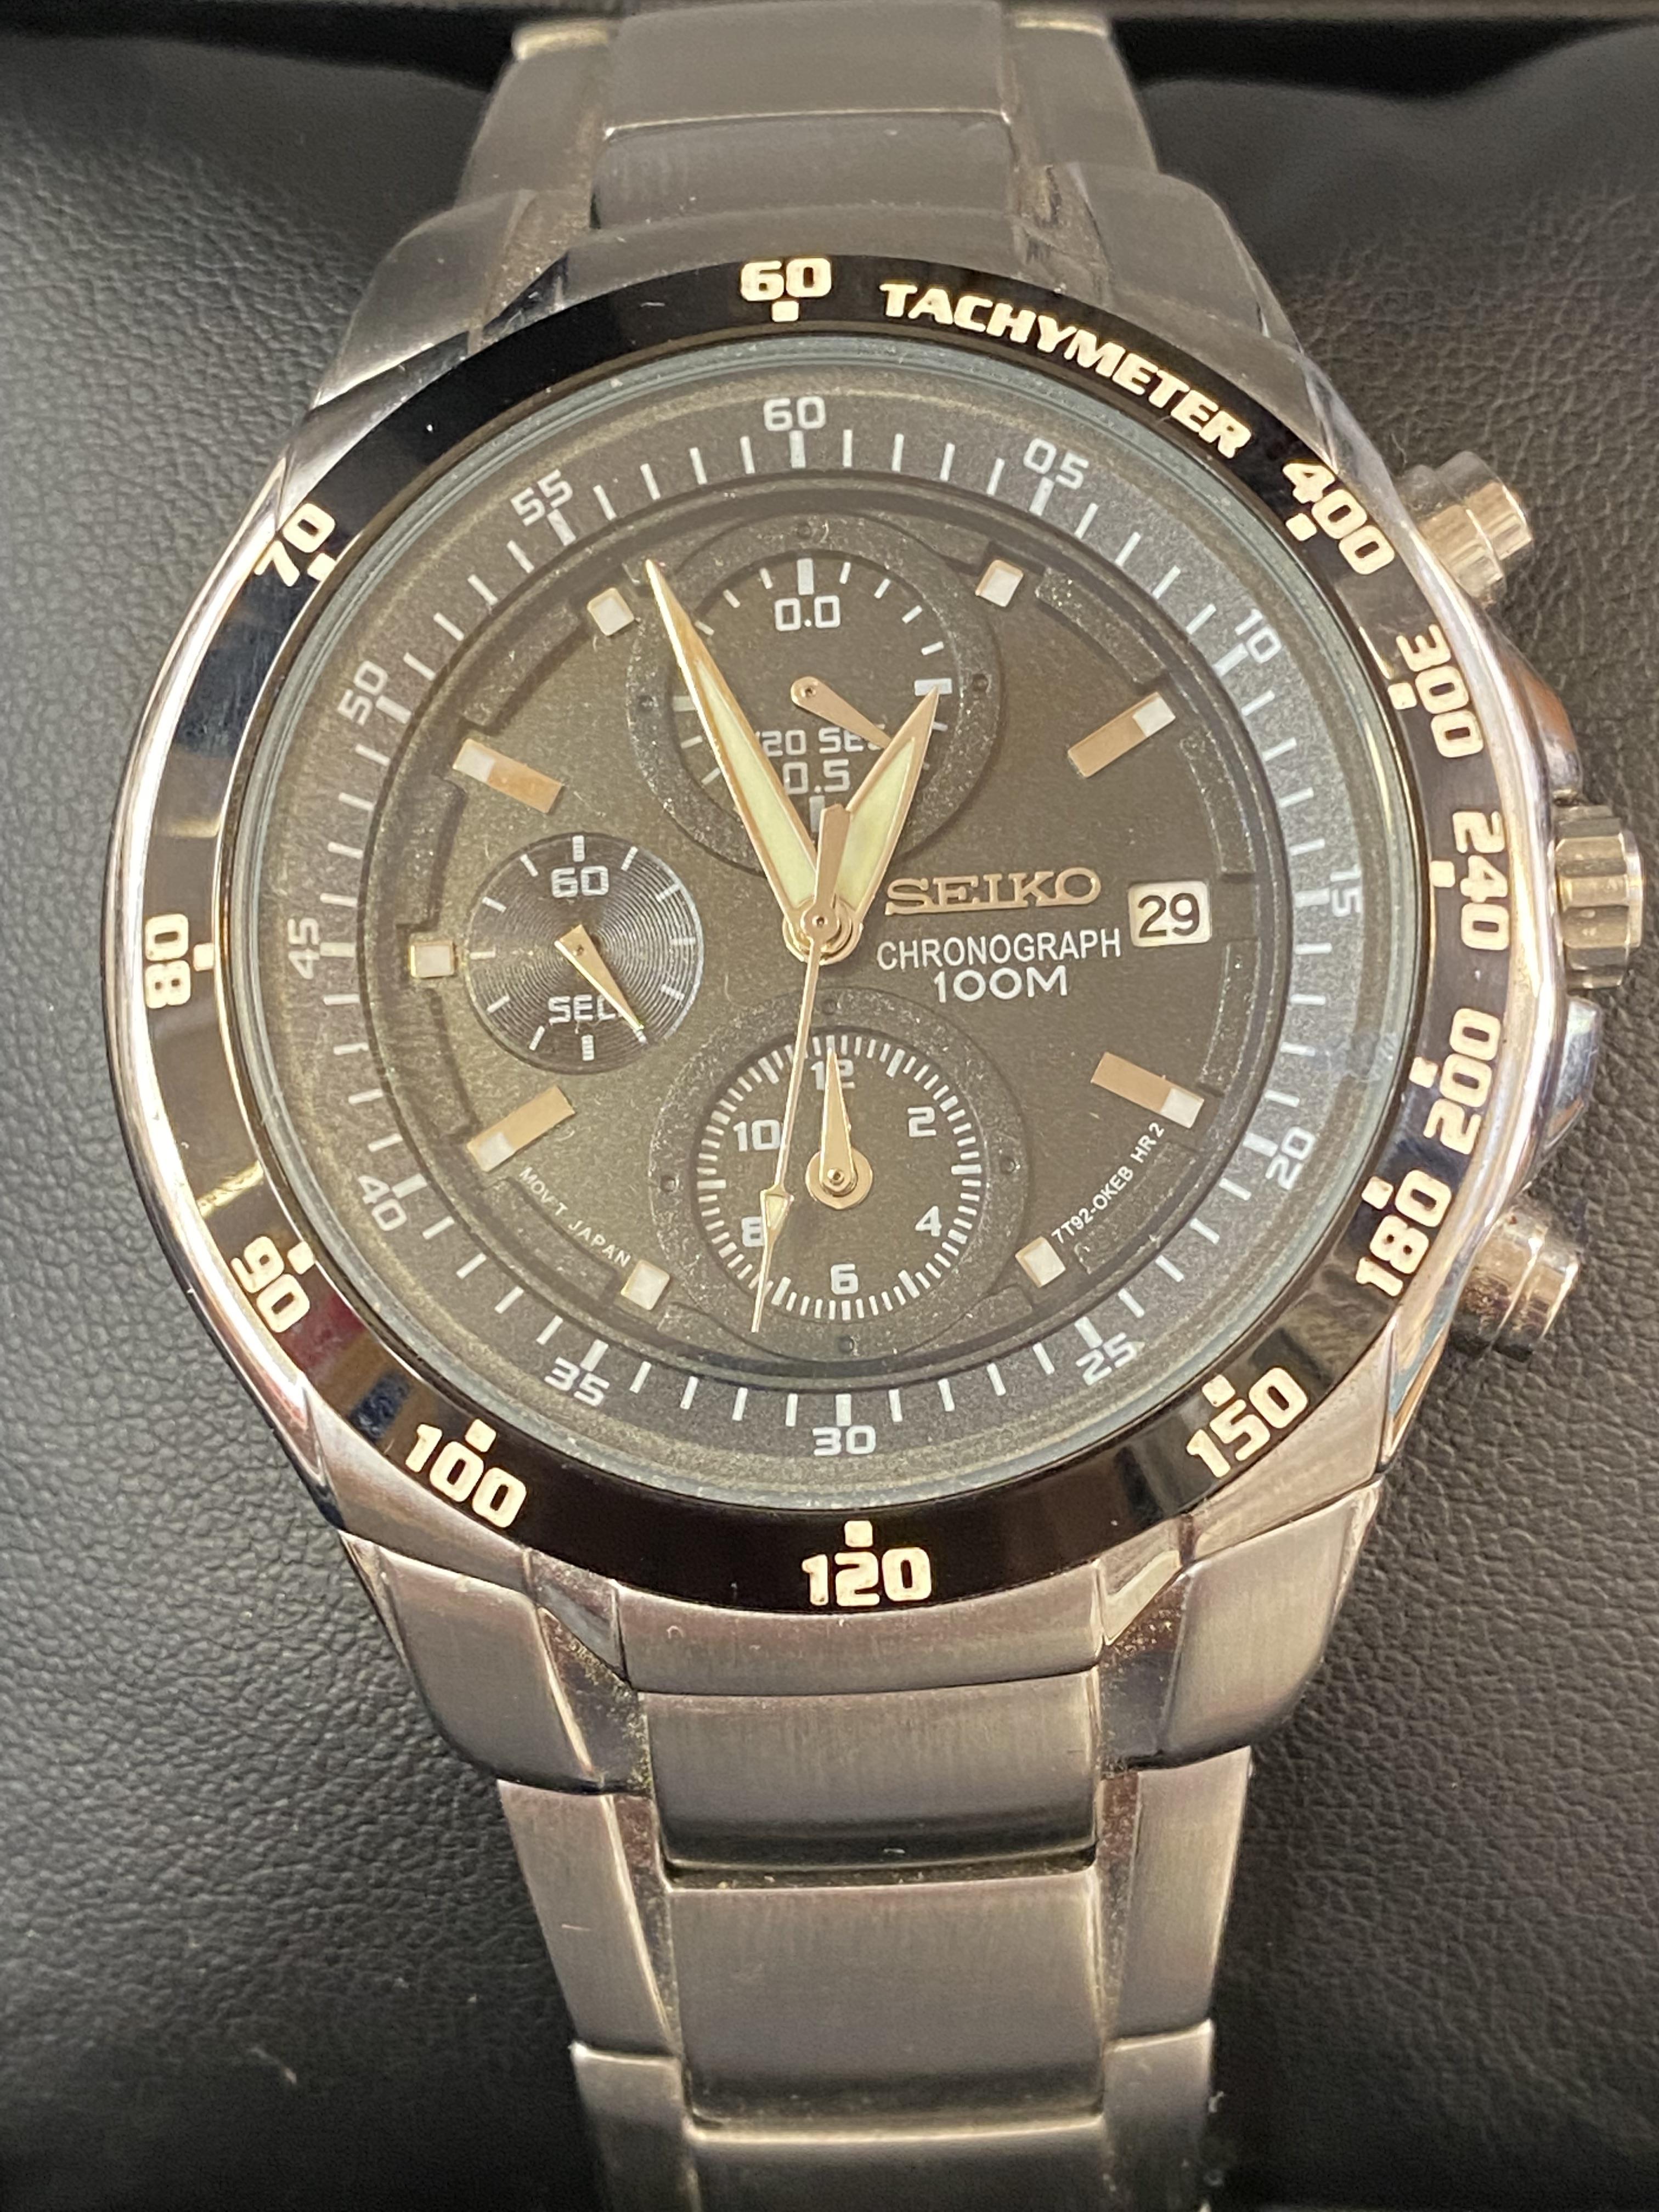 Seiko chronograph 100m wristwatch with date app at